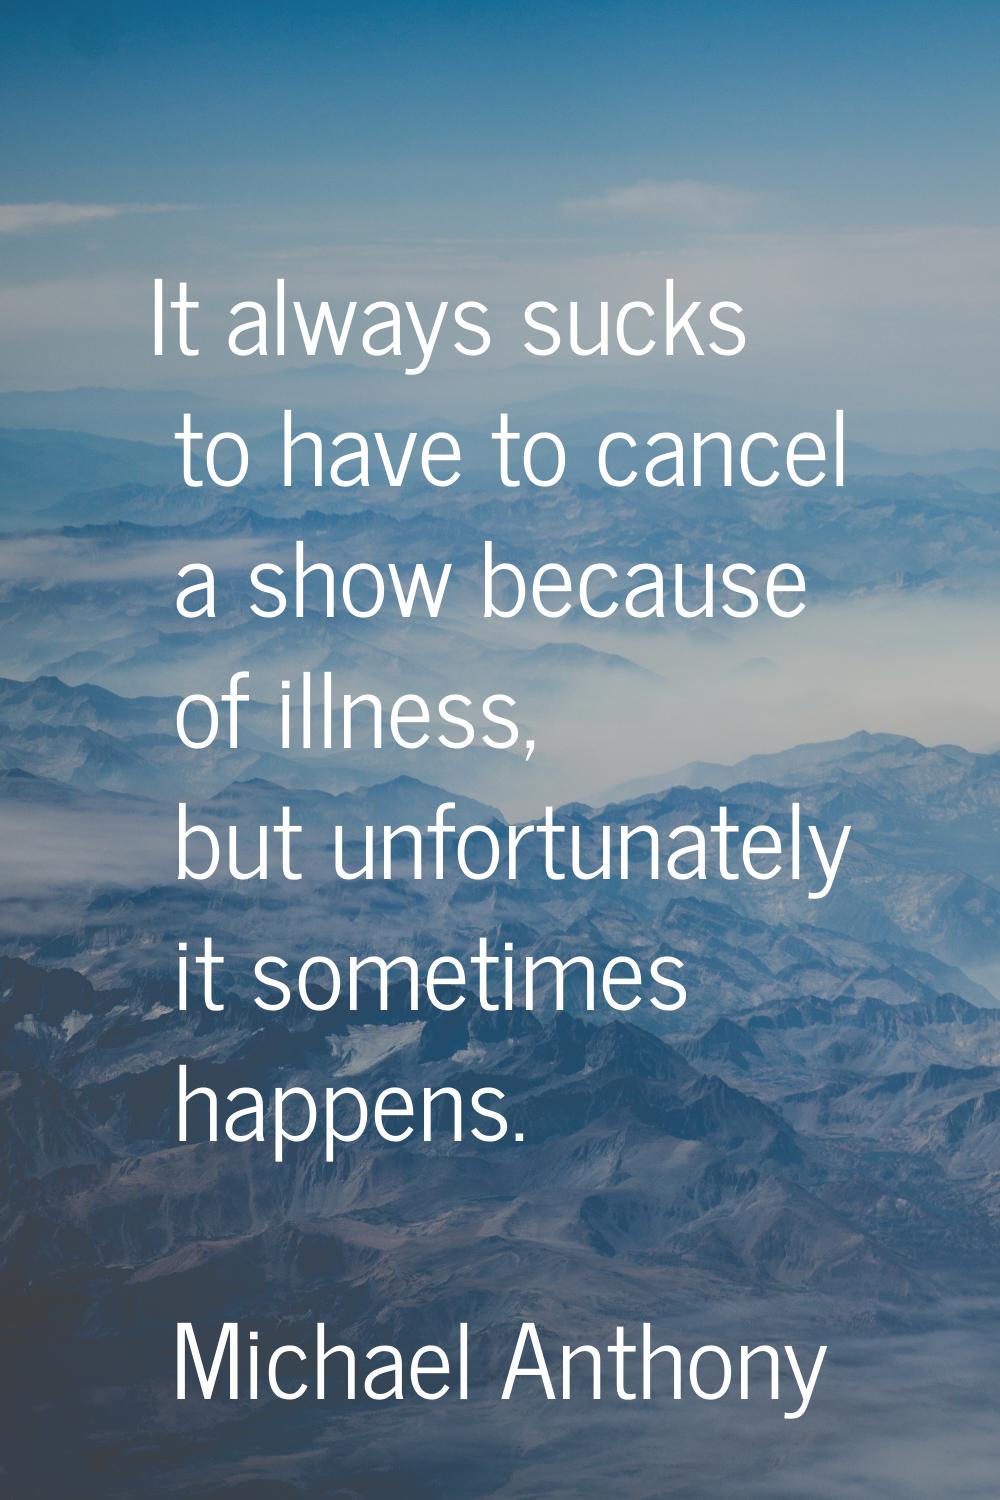 It always sucks to have to cancel a show because of illness, but unfortunately it sometimes happens